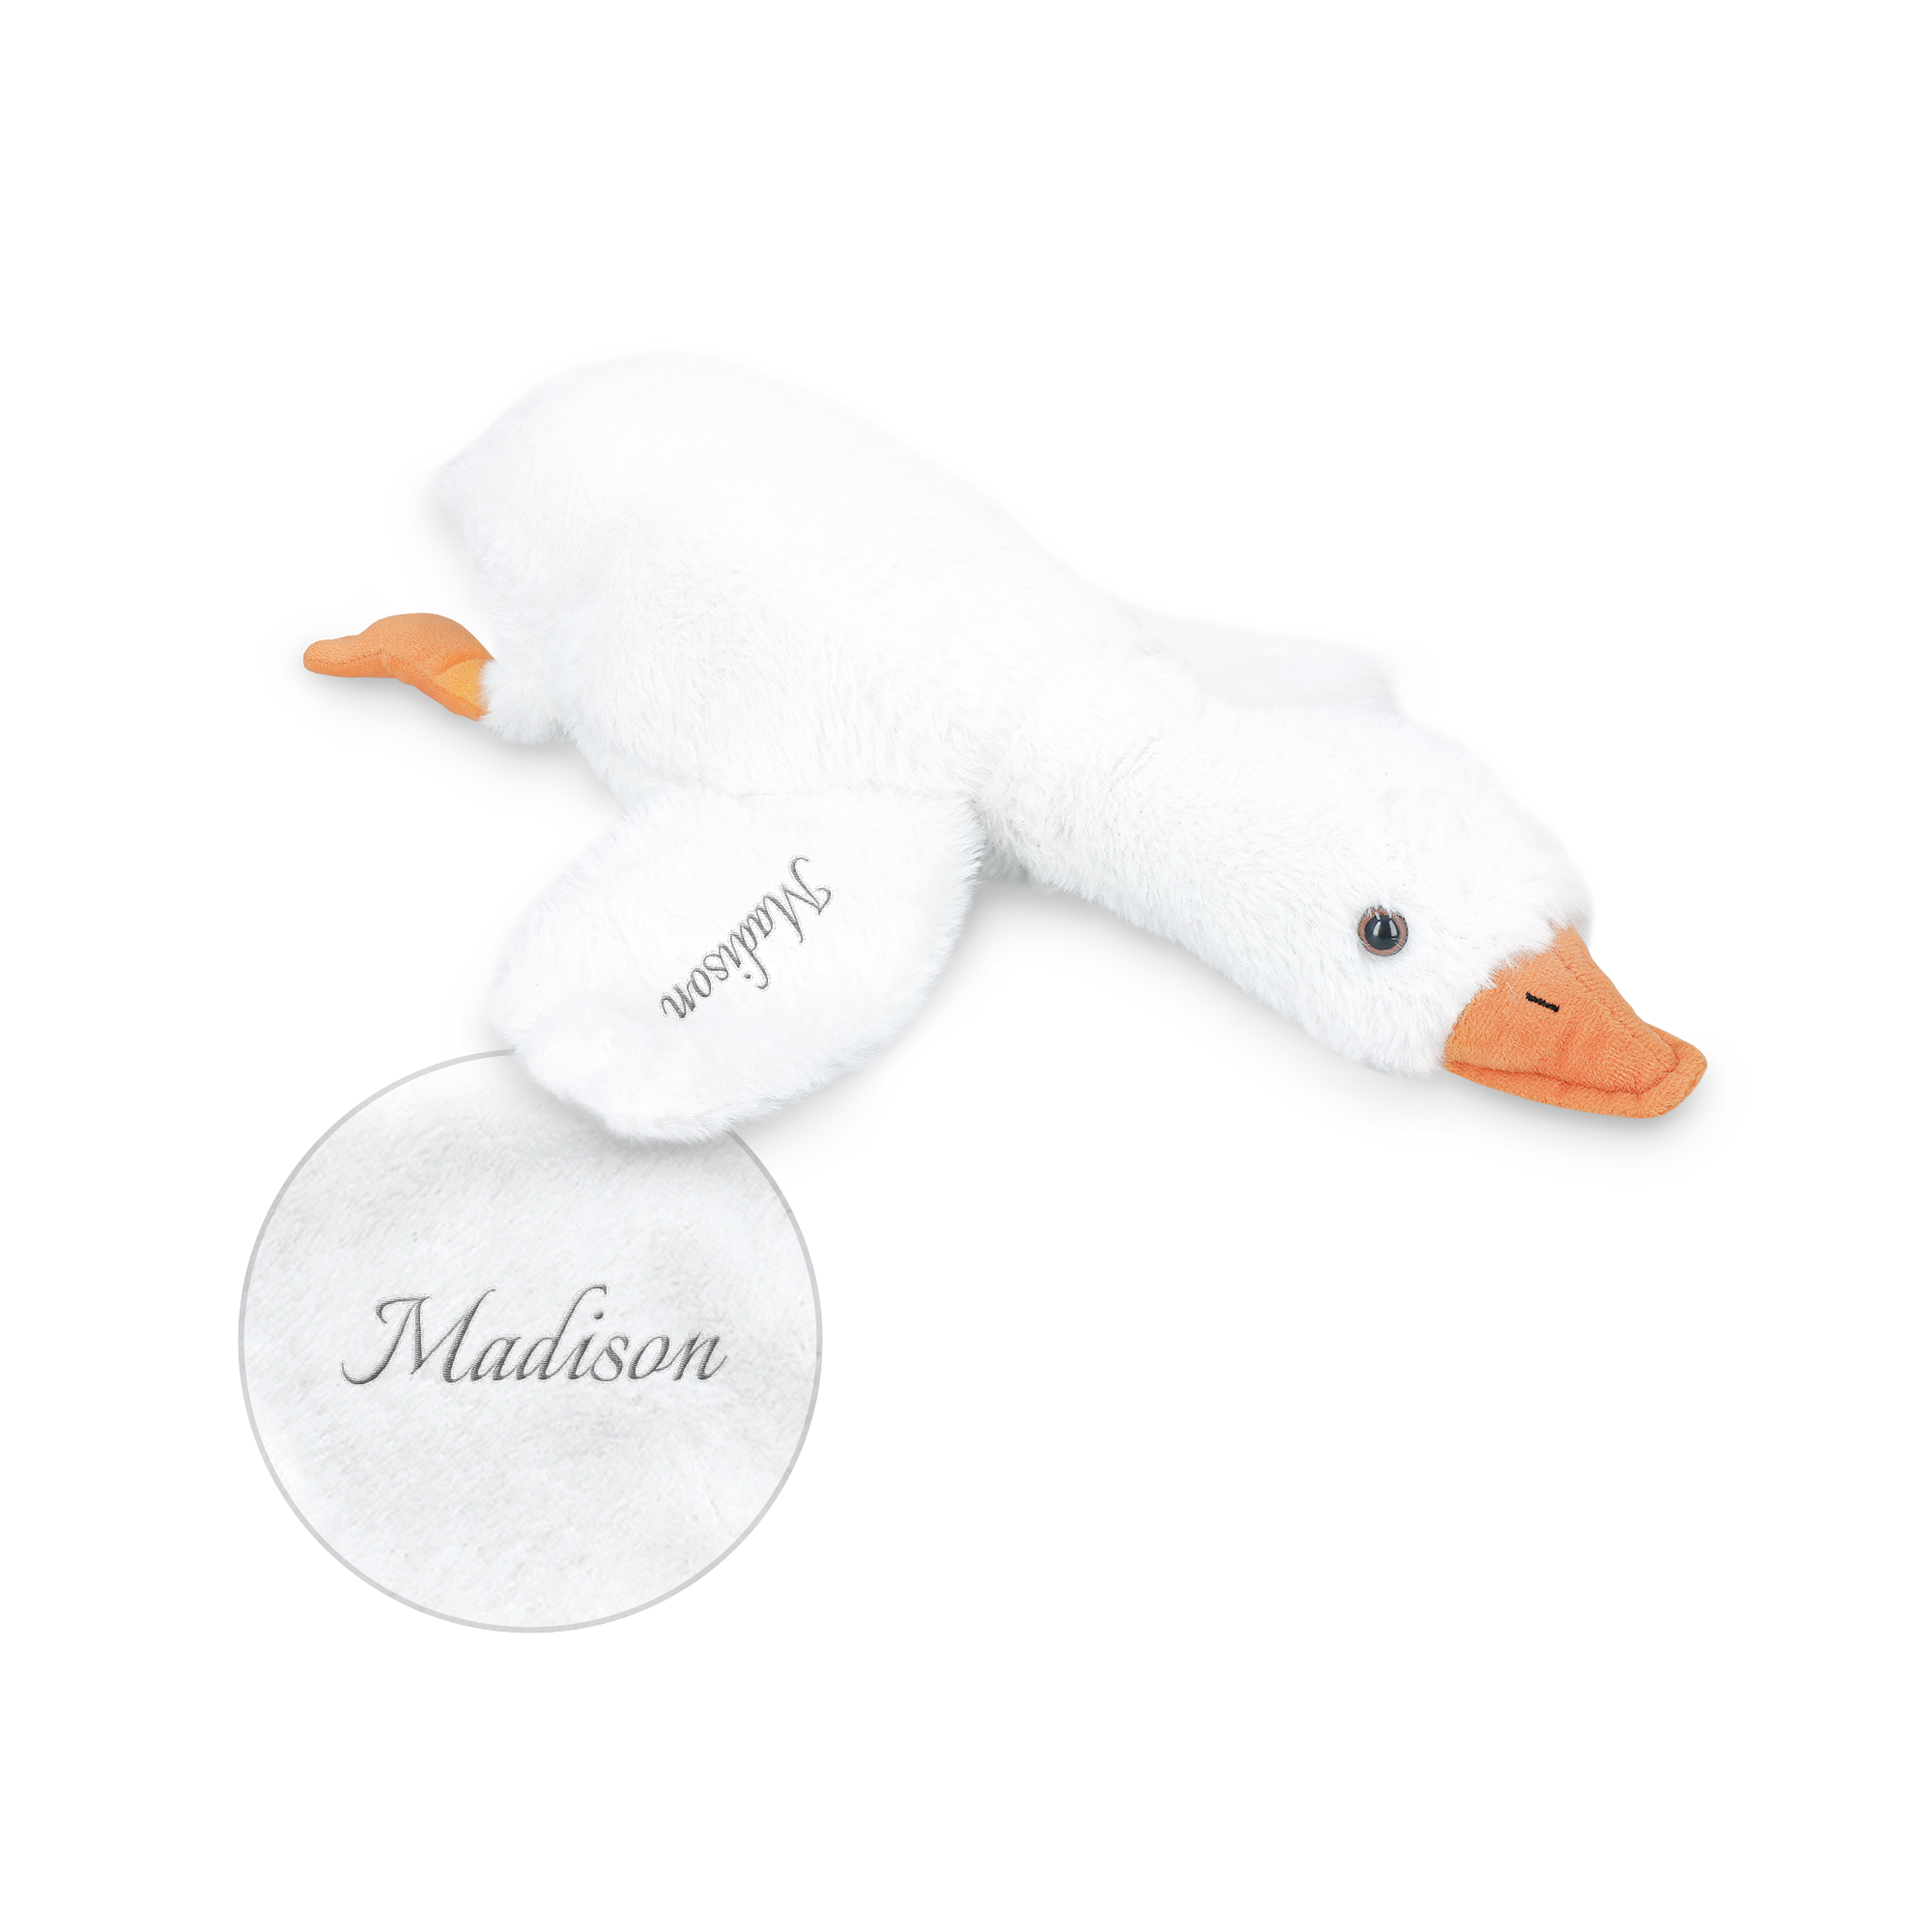 Personalised cuddly toy - Goose - S